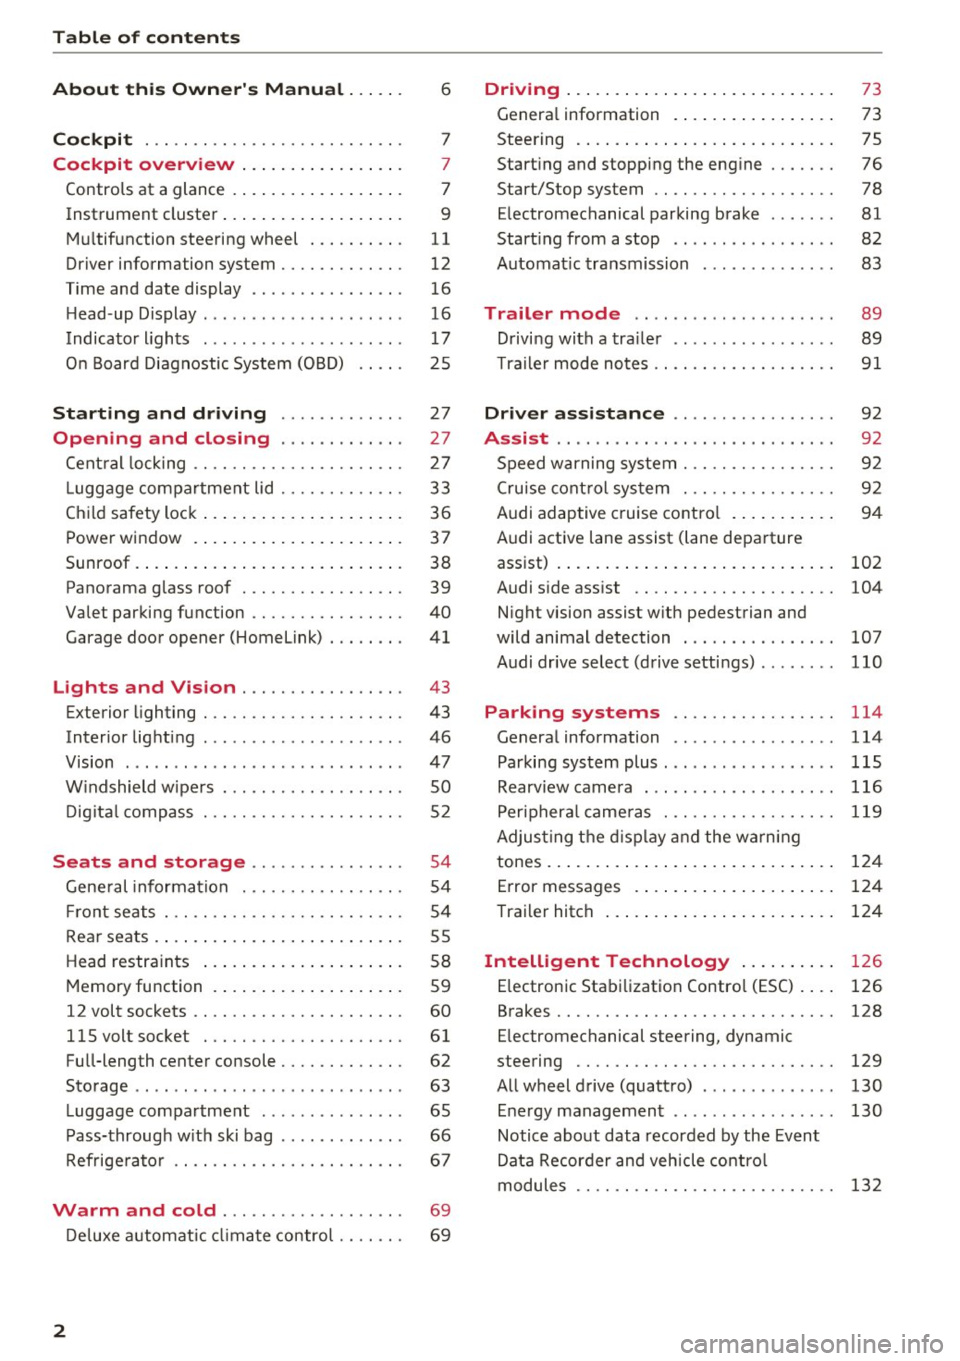 AUDI A8 2017  Owners Manual Table  of  contents 
About  this  Owners  Manual  ... .. . 
Cockpit  ... .. ............... .... ..  . 
Cockpit  overview  ................ . 
Controls  at  a  glance  ... .......... .. ..  . 
Instru